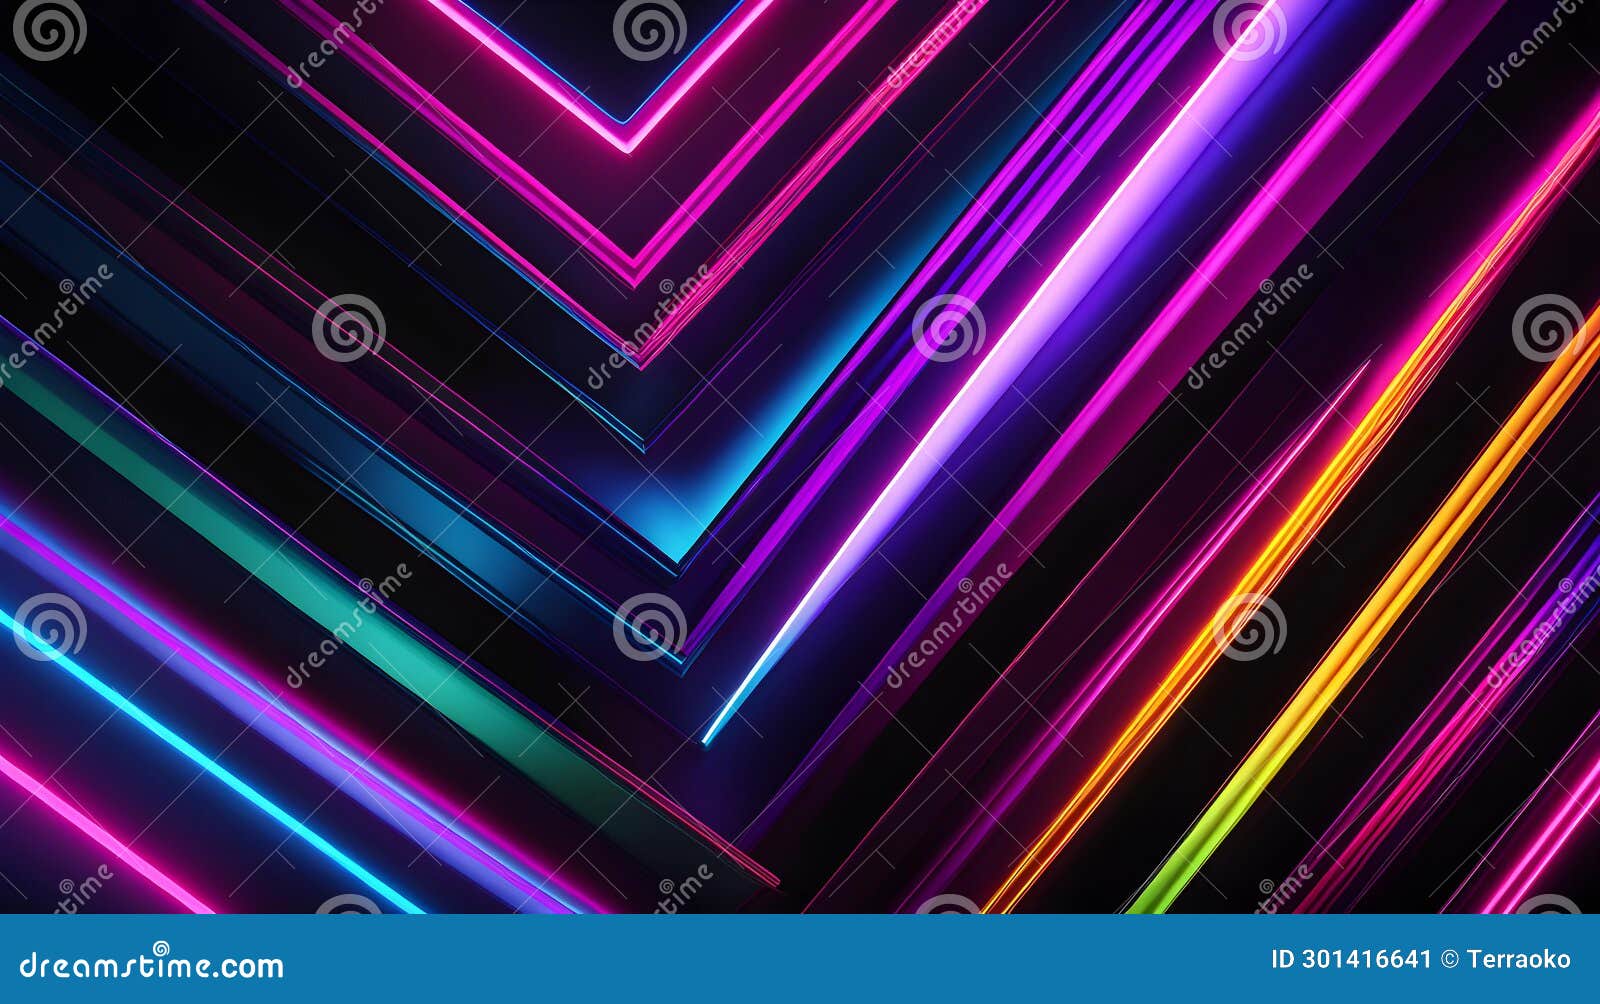 Abstract Diverging Neon Lines Isolated on Black Background. Digital Techno  Wallpaper for Design, 3D Rendering, Stock Illustration - Illustration of  flash, lines: 301416641